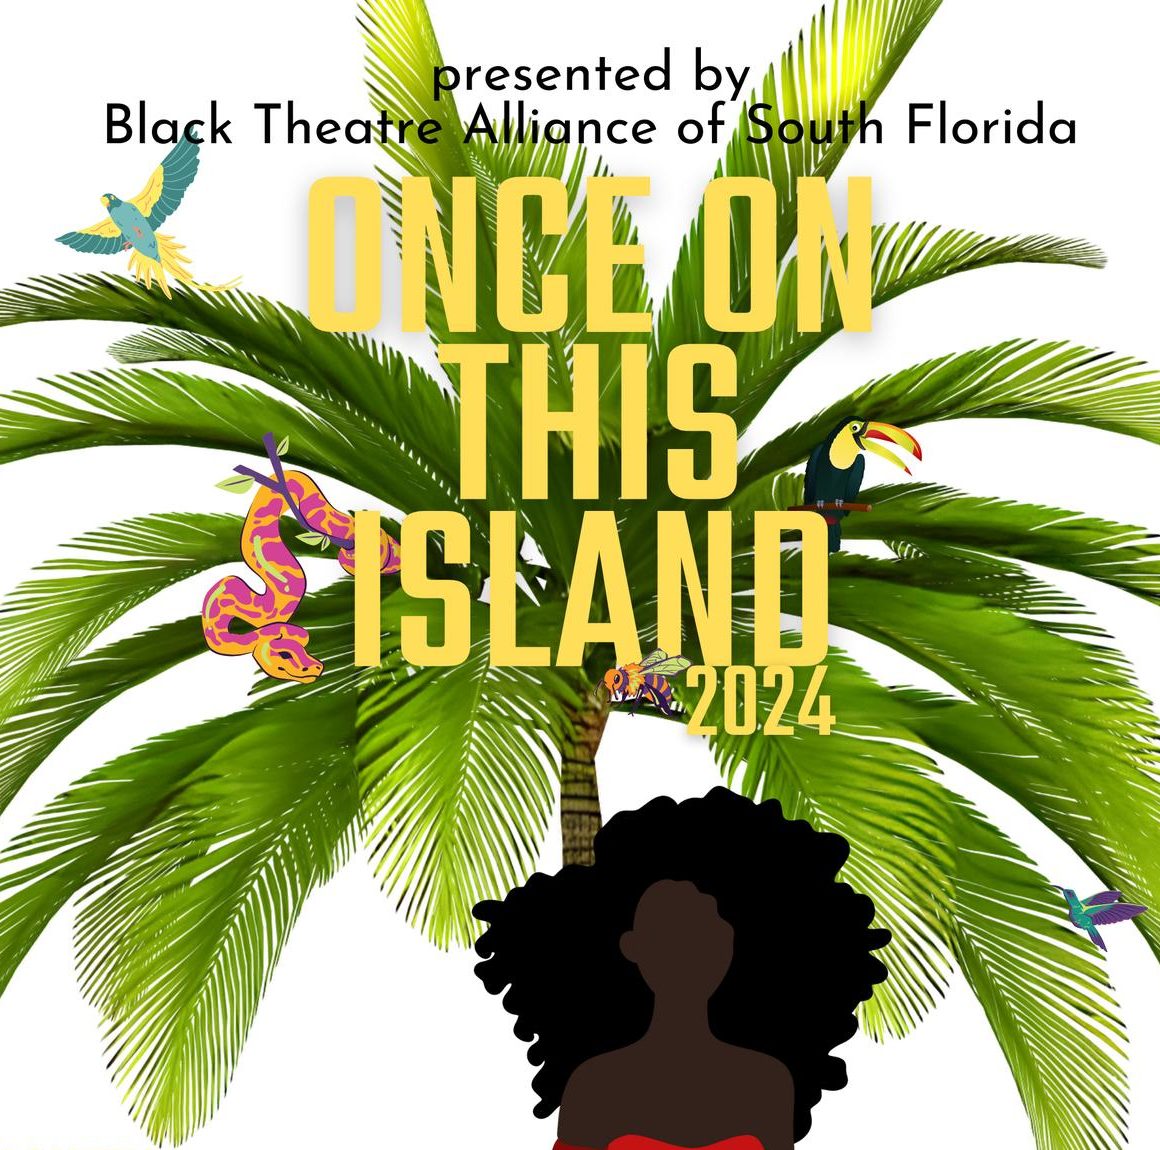 Once On This Island - the Broadway Musical